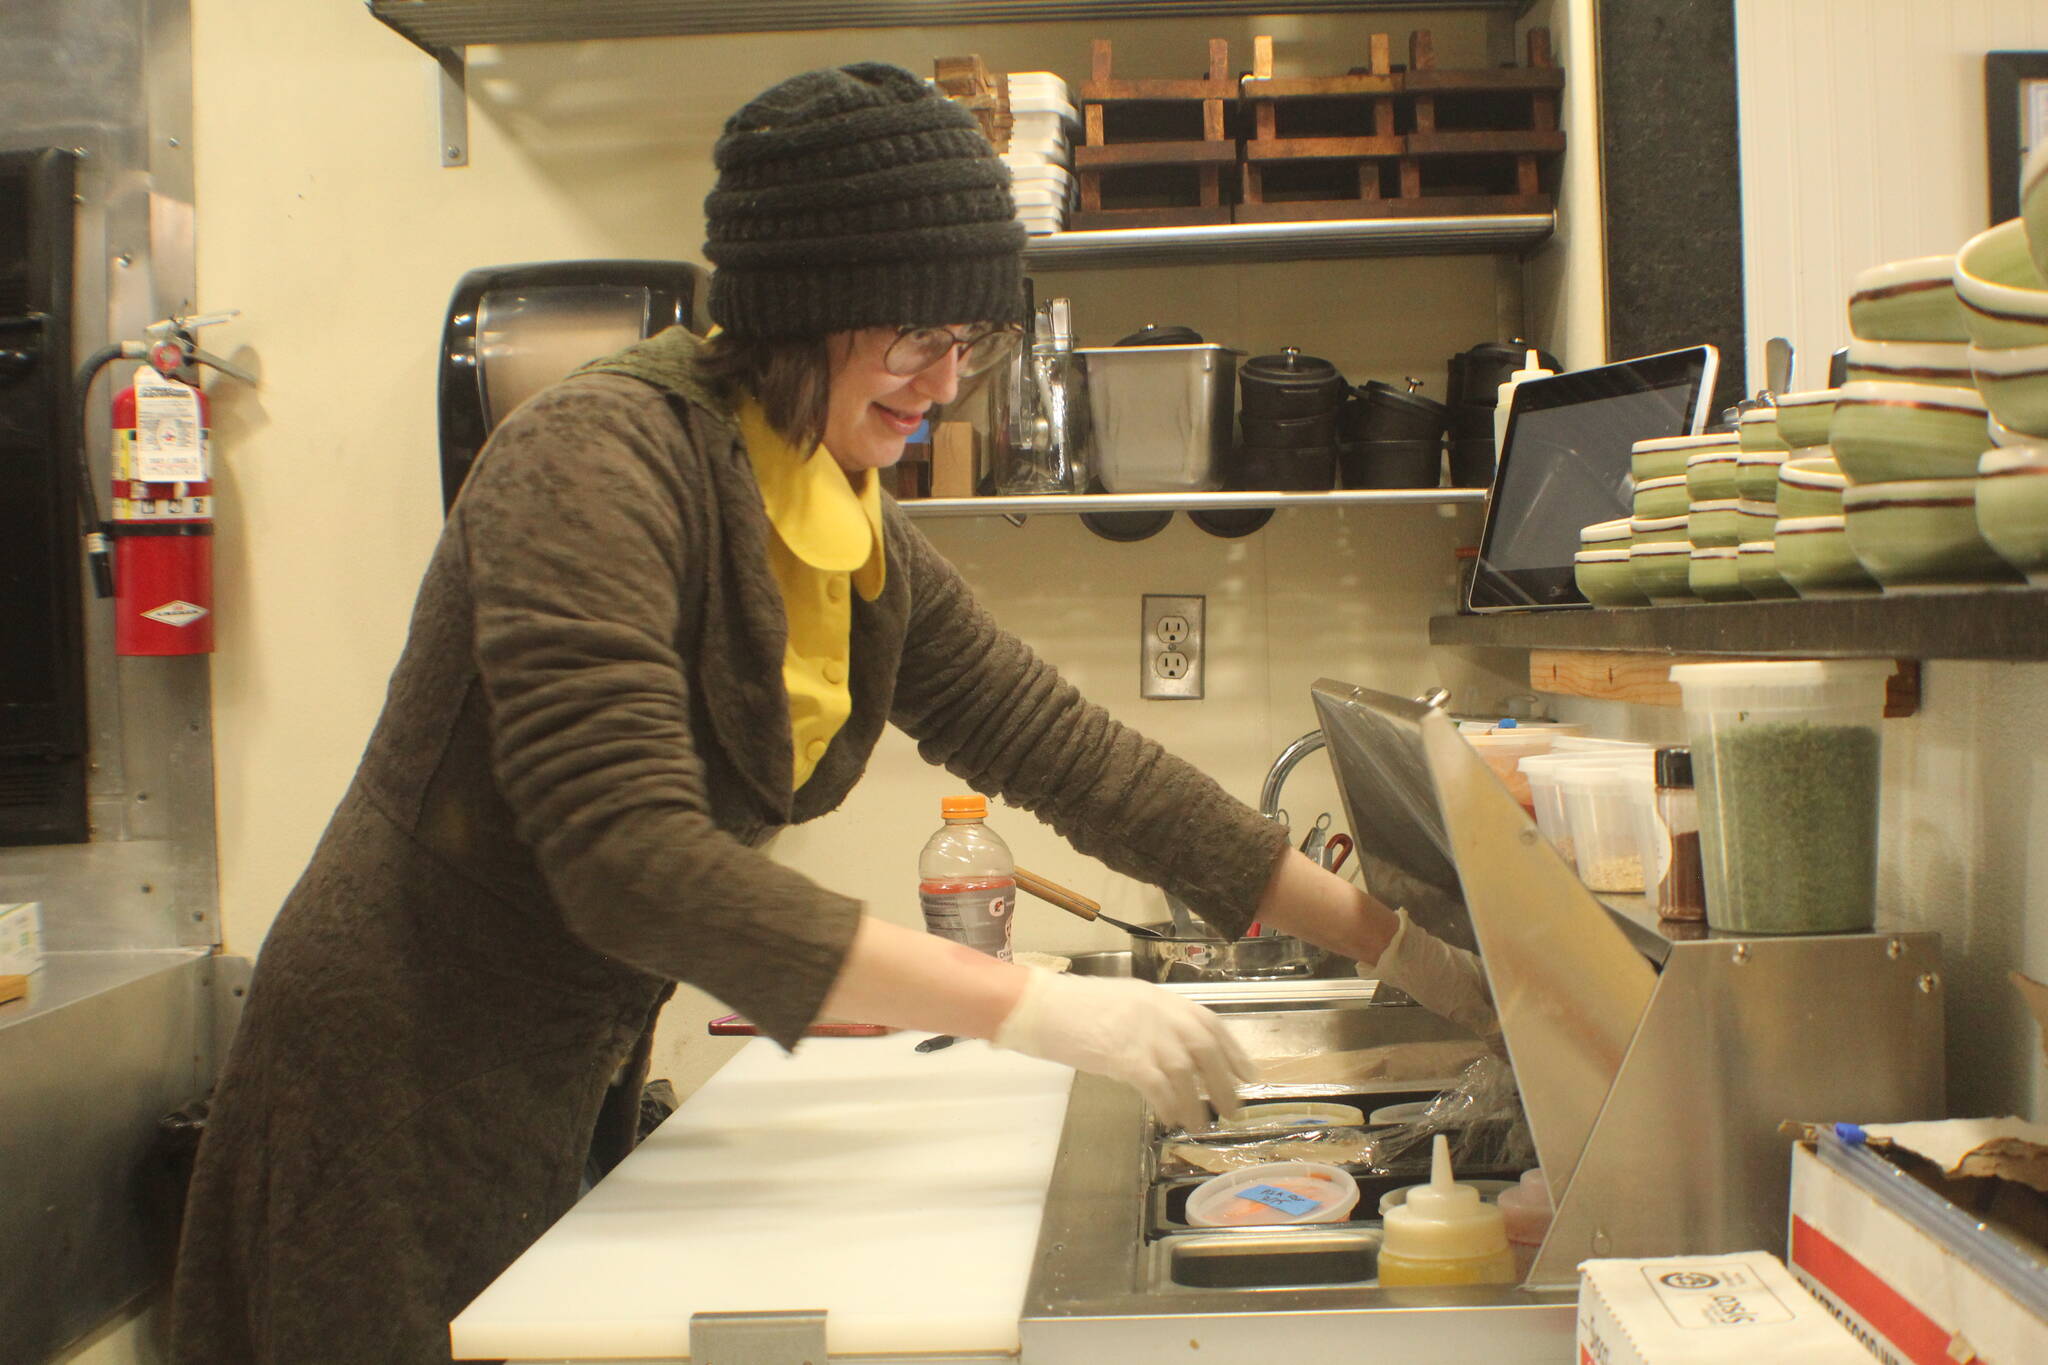 Photo by Karina Andrew/Whidbey News-Times
Lees Datin prepares food in the kitchen at Overboard, a casual Coupeville eatery located at 4 Front Street.